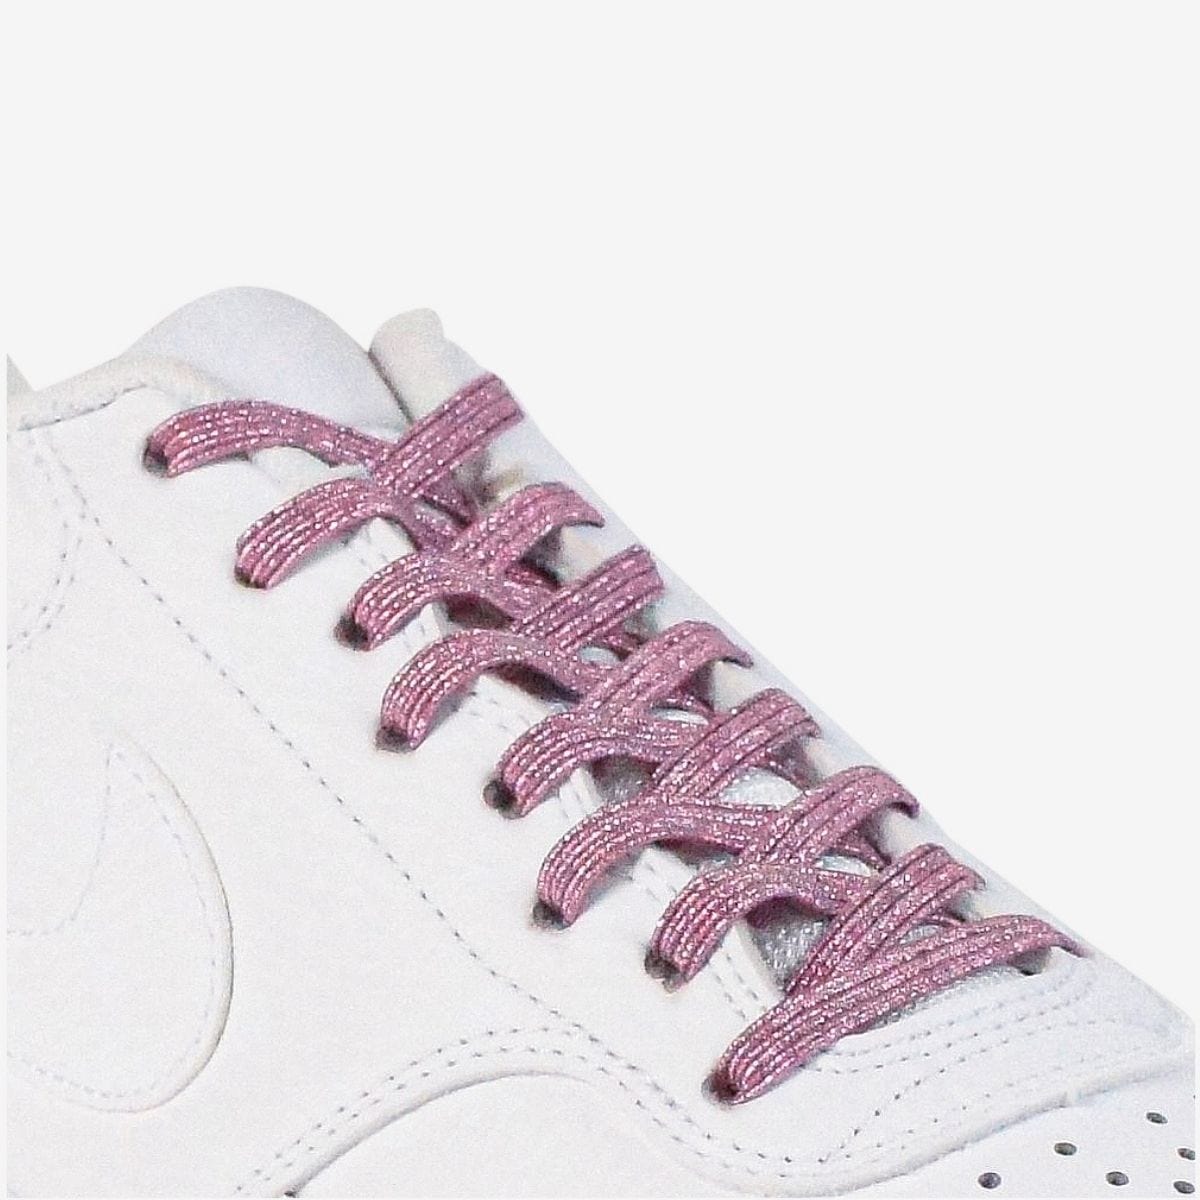 different-ways-to-lace-shoes-with-pink-elastic-shoelaces-on-white-kicks